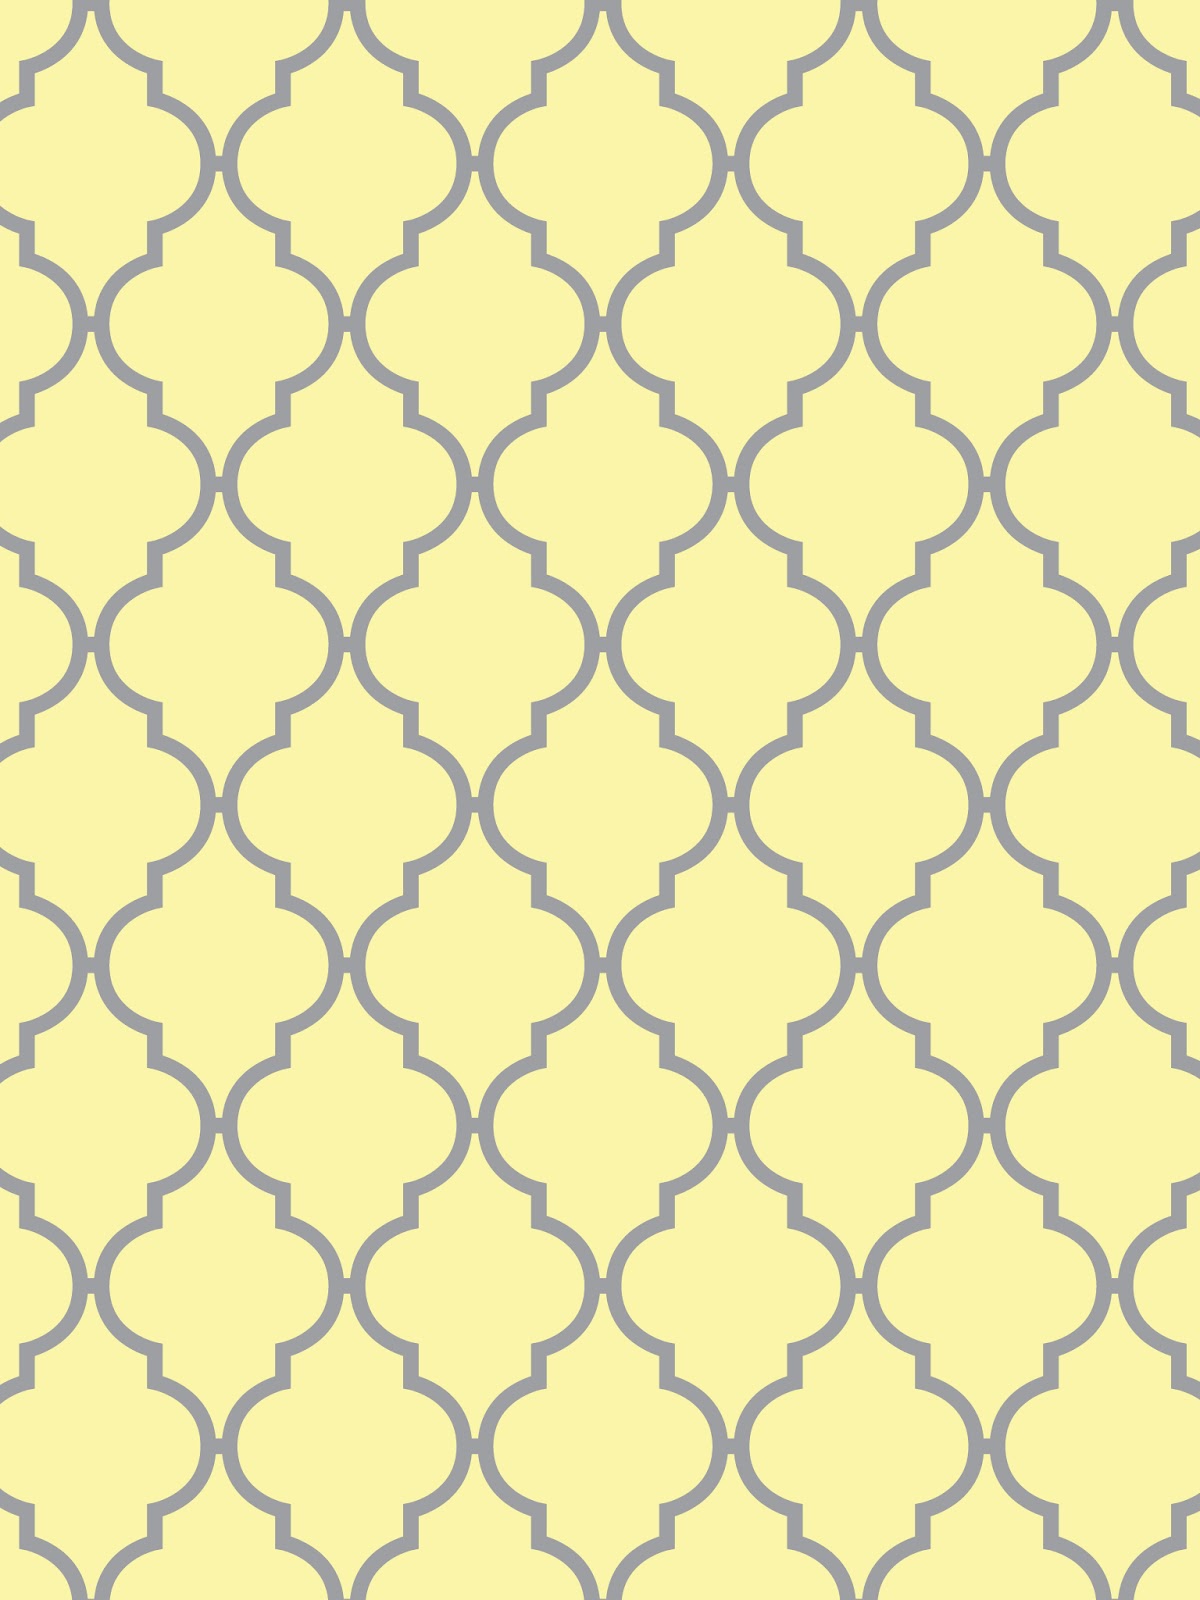 ... --Printables & Backgrounds/Wallpapers: Quatrefoil...Summery Yellows